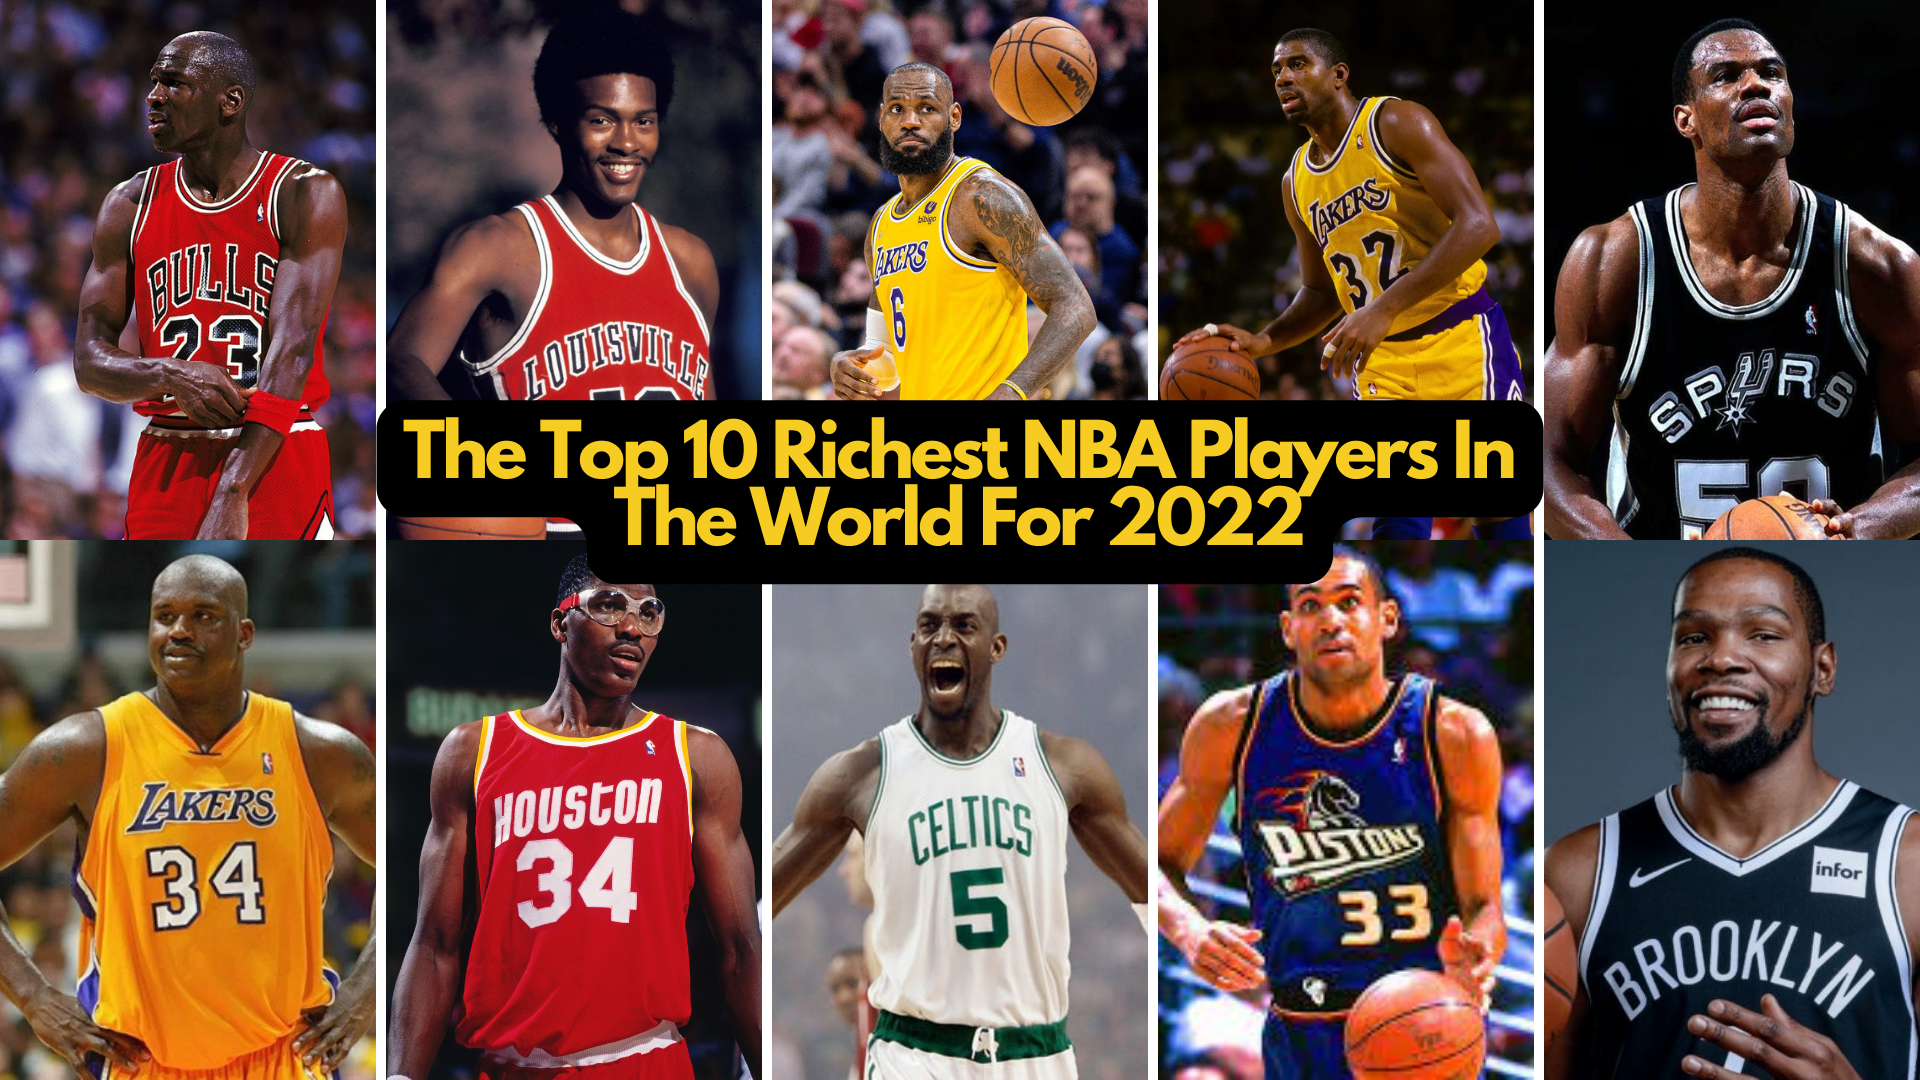 The Top 10 Richest NBA Players In The World For 2022 - Based On Salaries, Net Worth And Endorsements